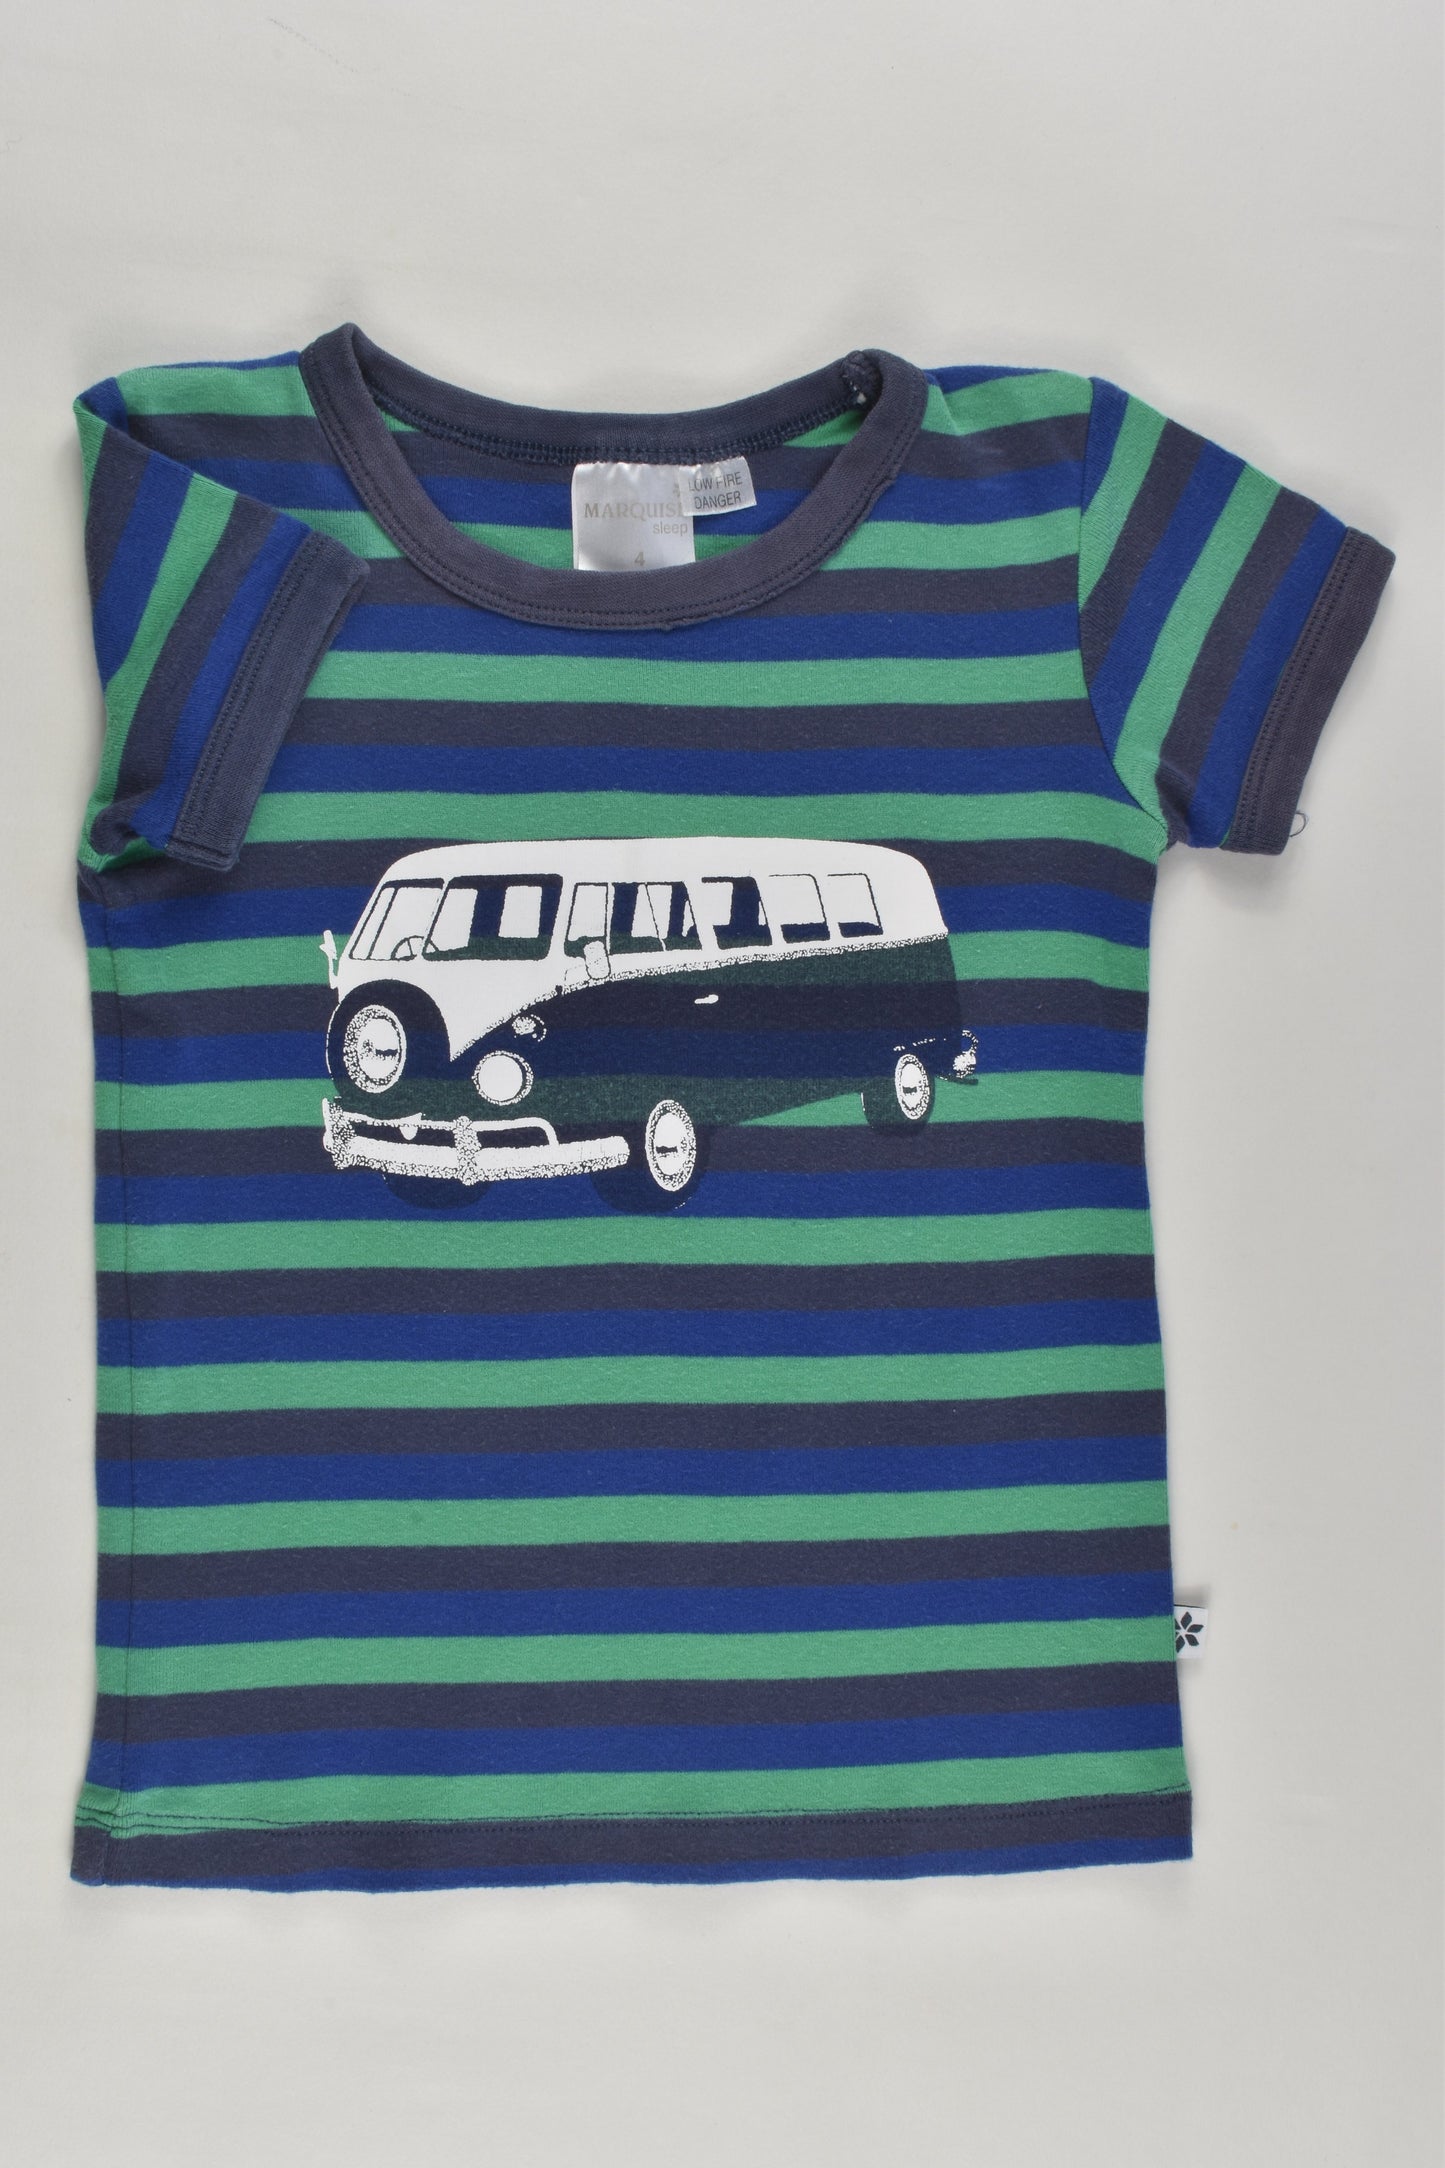 Marquise Size 4 T-shirt